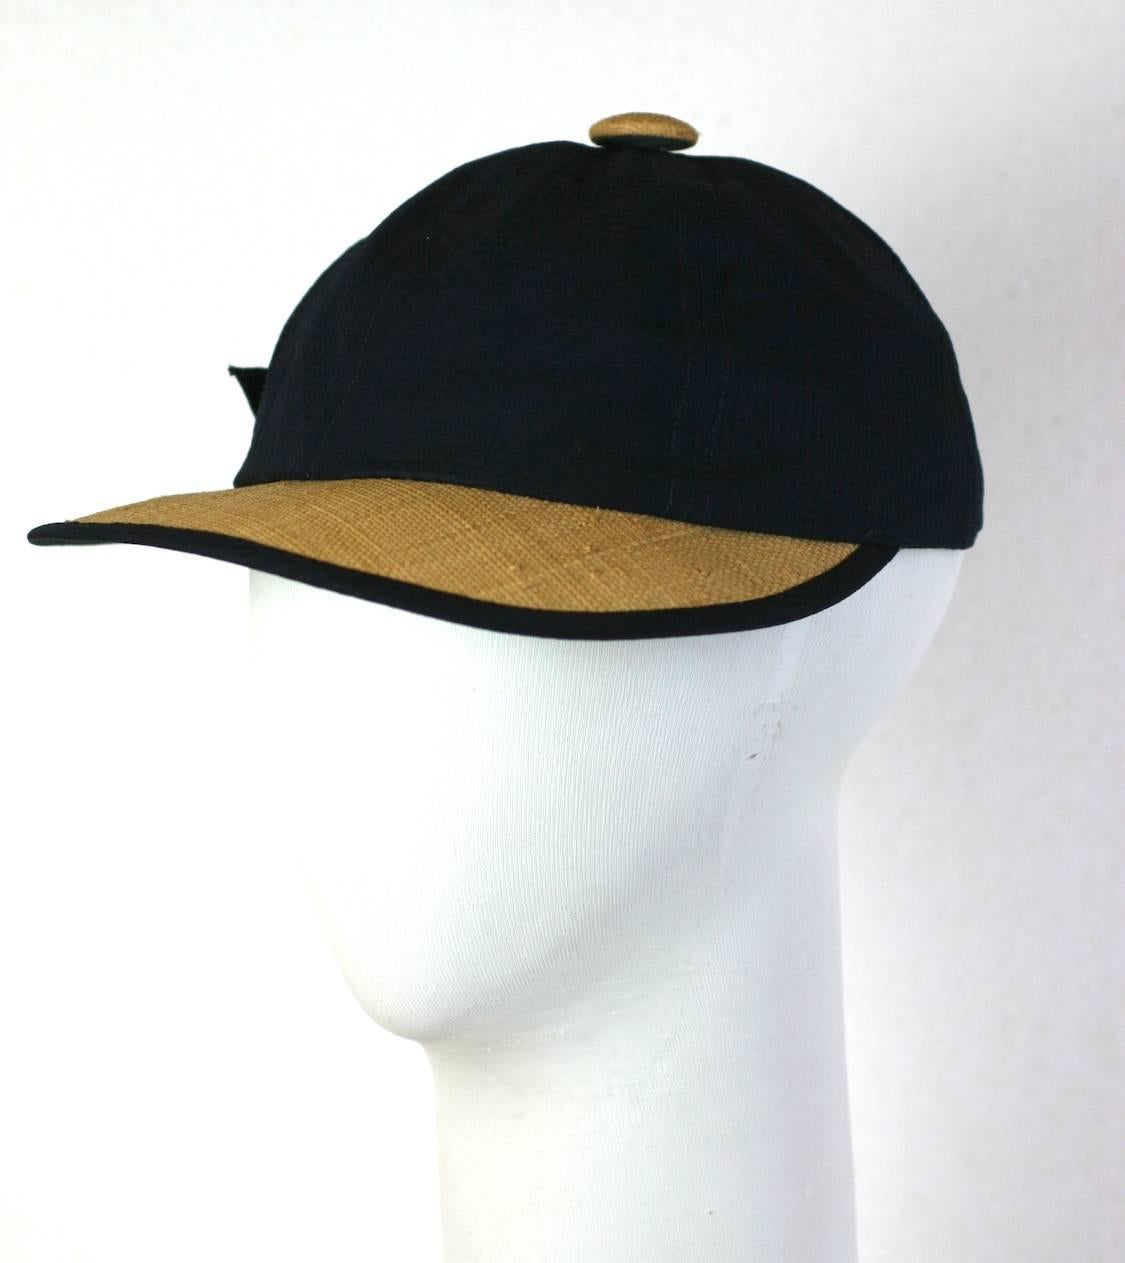 Charming 1950's raffia and navy seersucker cap by Kathleen Originals of Miami.
Beach wear fashions of the 50's used unusual materials such as seersucker and raffia for both fashion and sun protection purposes.
Crown 3.5